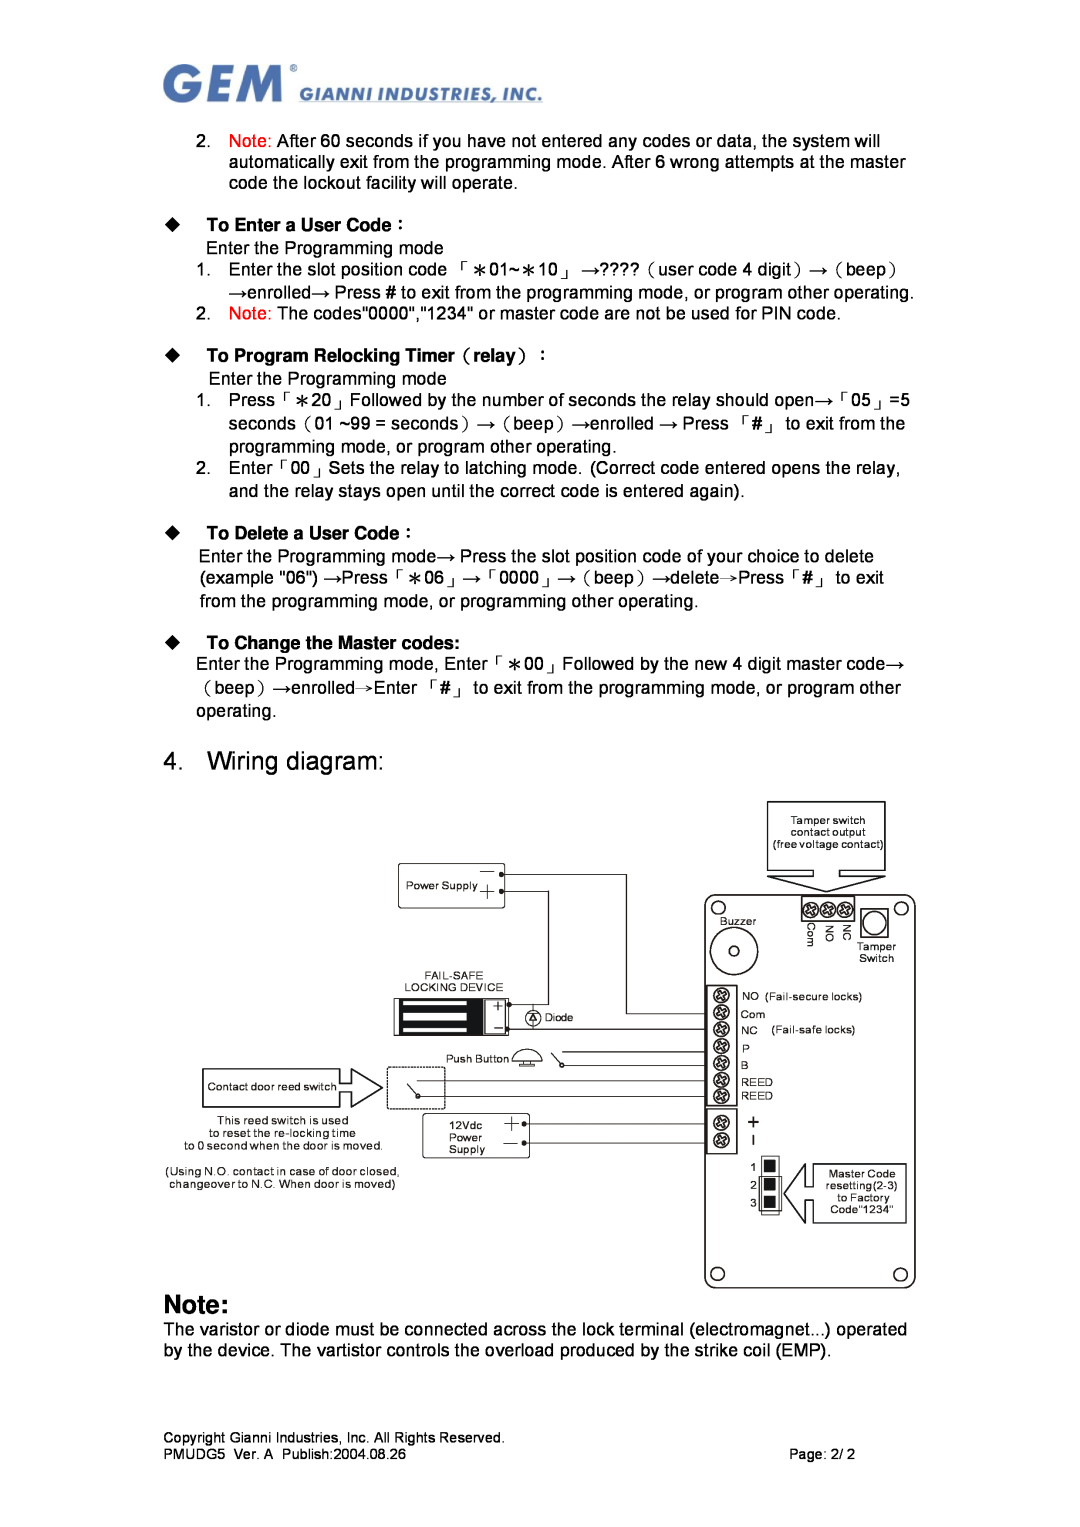 Gianni Industries DG-5 Wiring diagram, ‹ To Enter a User Code： Enter the Programming mode, ‹ To Delete a User Code： 